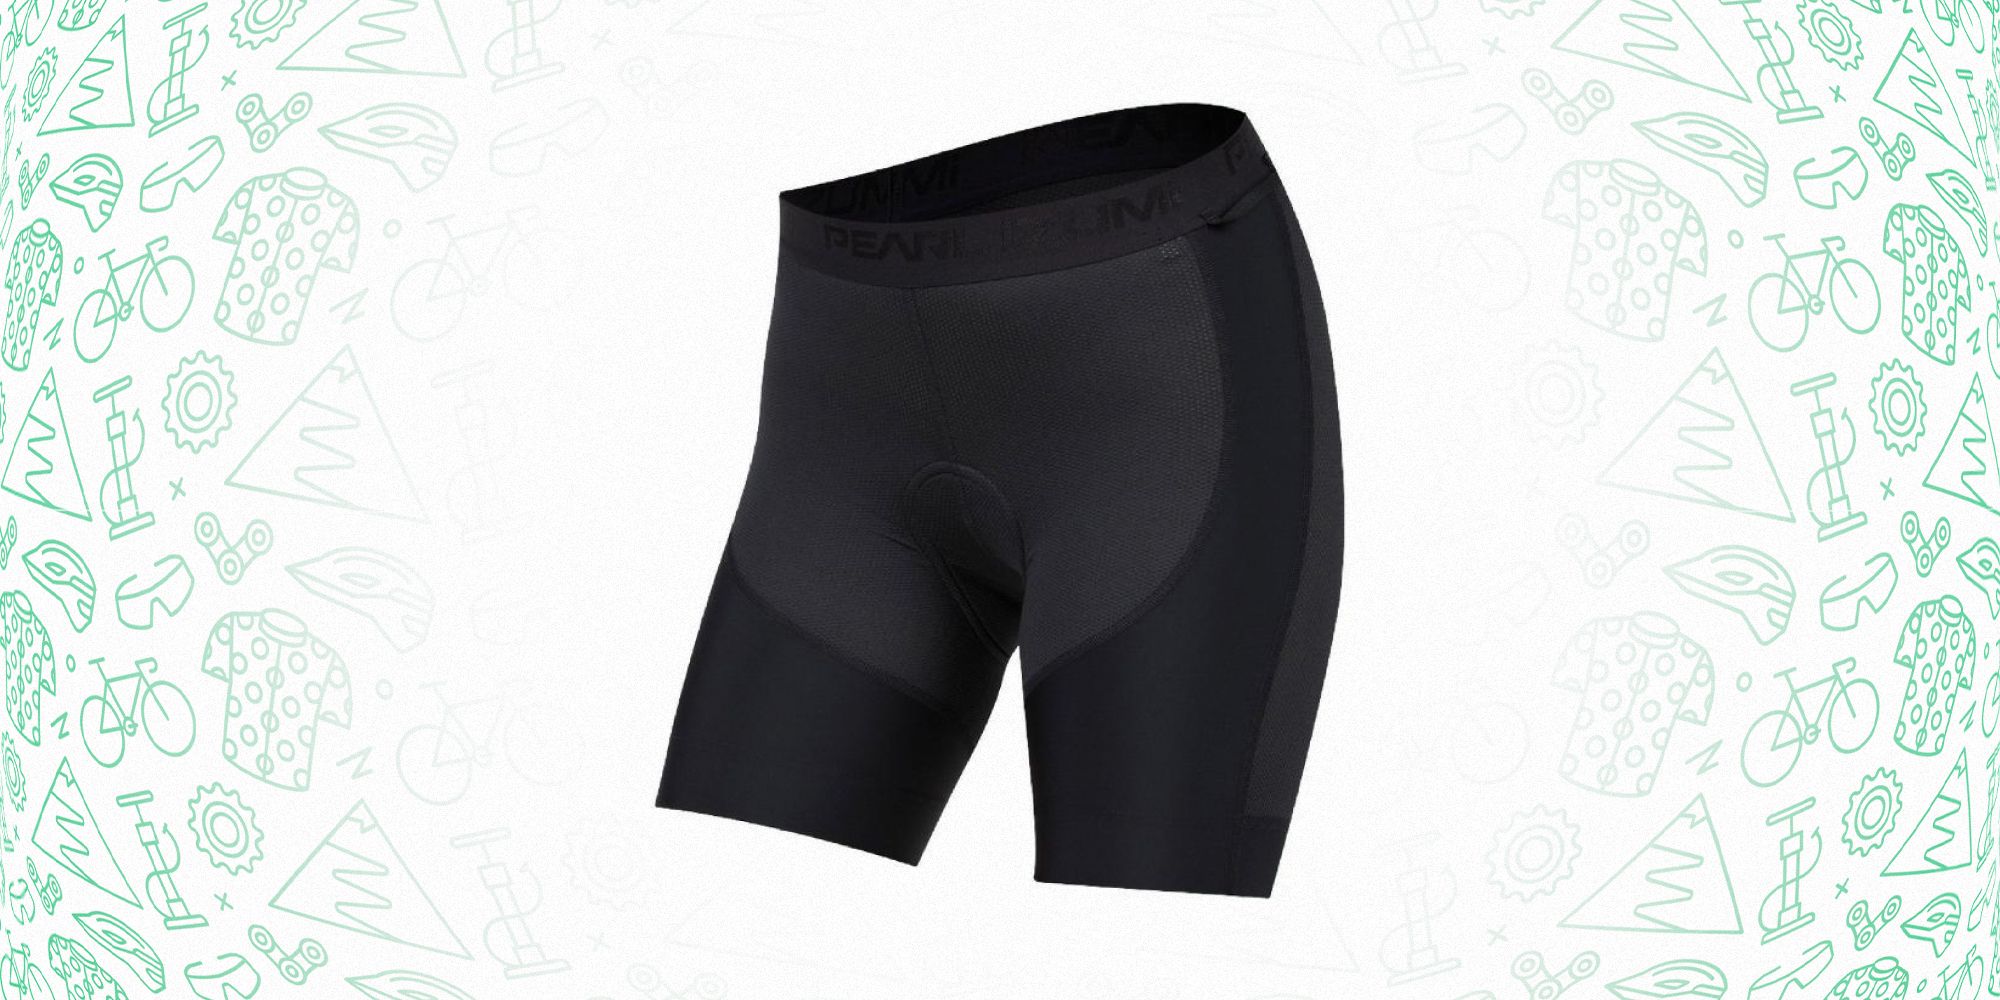 Review: MyPakage underwear a great choice for the commuter cyclist